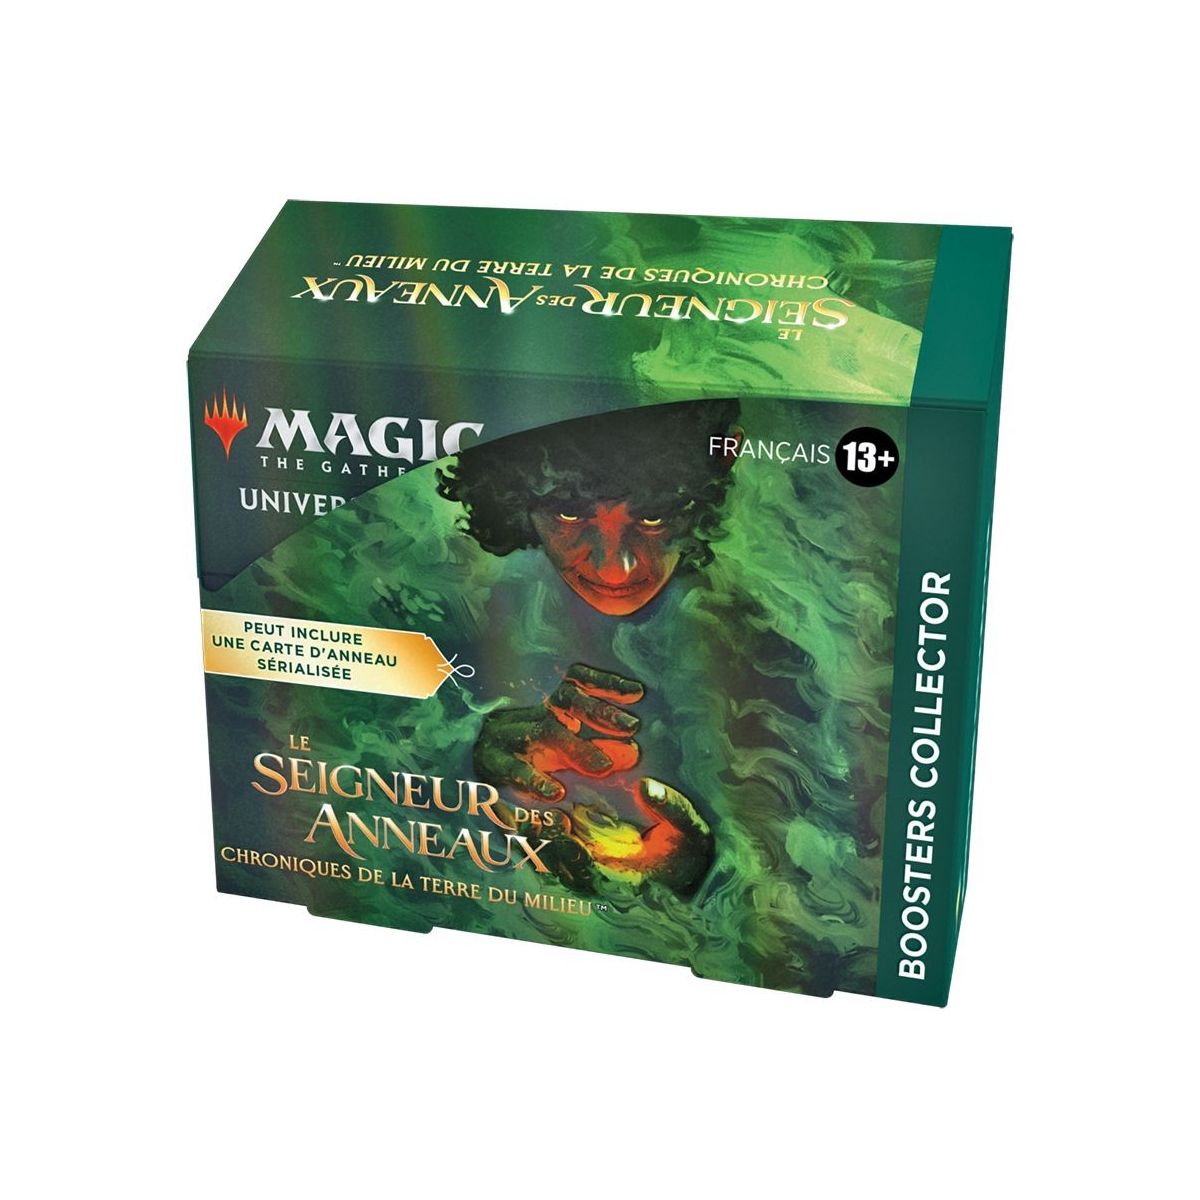 Item Magic The Gathering - Booster Box - Collector - The Lord of the Rings: Chronicles of Middle-earth - FR